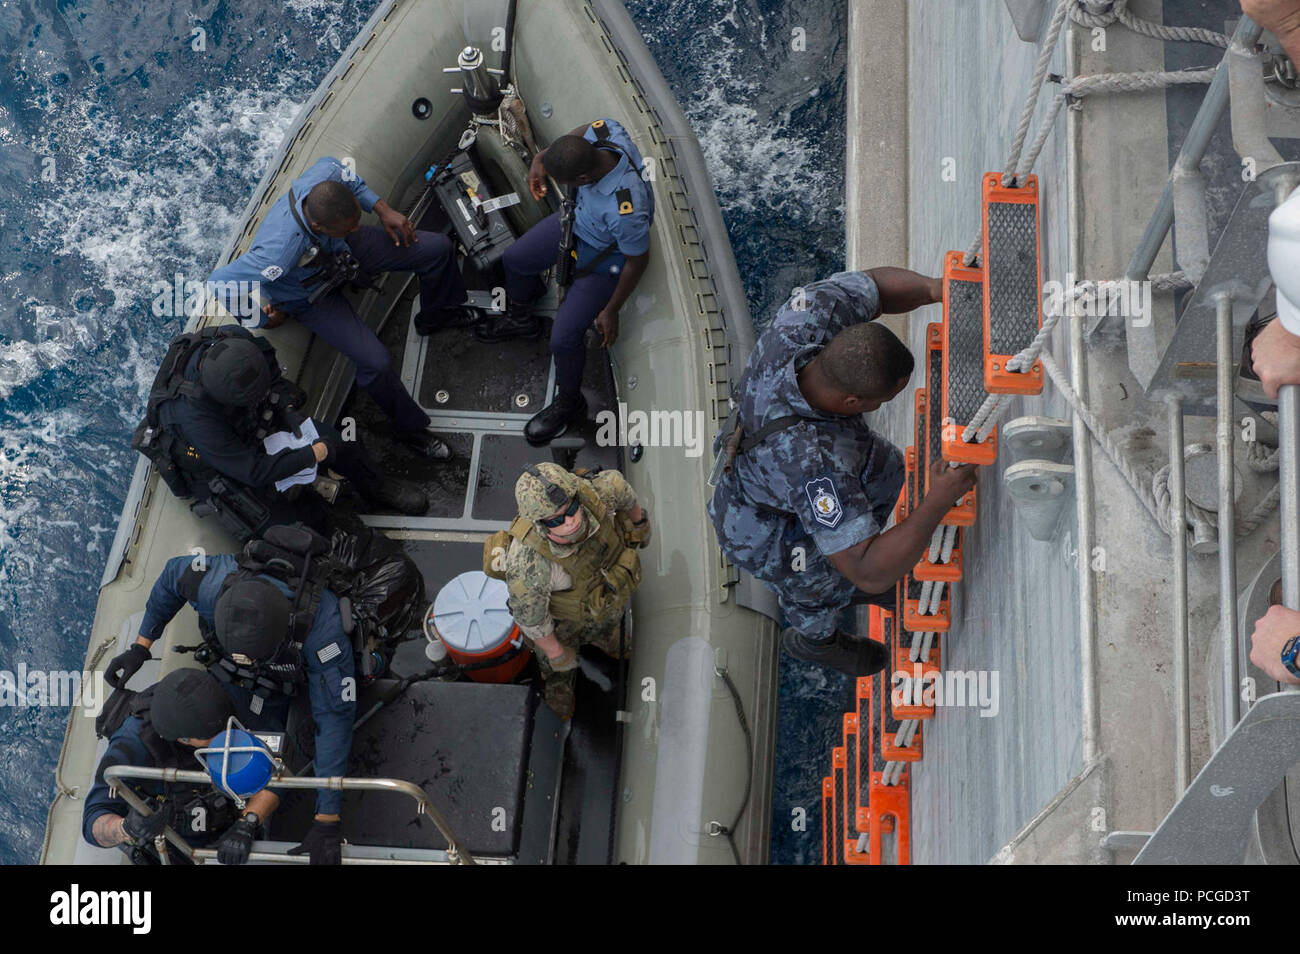 OF GUINEA (March 26, 2014) A Ghanaian sailor embarked aboard the Military Sealift Command joint high-speed vessel USNS Spearhead (JHSV 1) climbs down into the rigid-hull inflatable boat during small boat operations as part of a U.S. and Ghana navy combined maritime law enforcement operation under the African Maritime Law Enforcement Partnership  program. Stock Photo